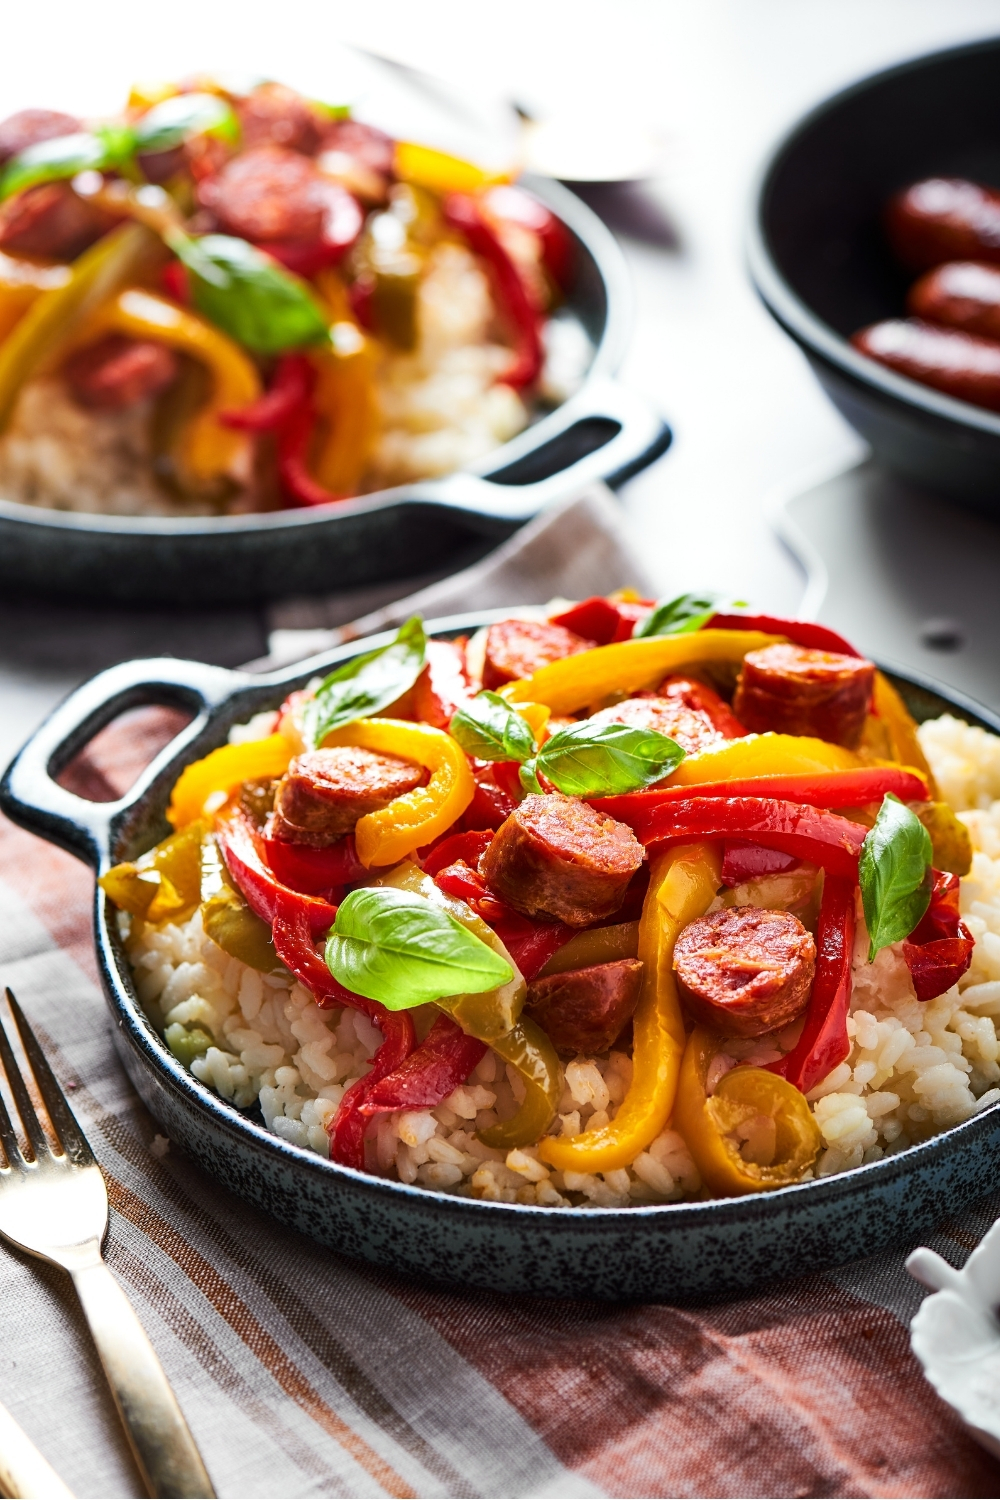 A bowl with sliced Italian sausage, red, green, yellow peppers and onions all on top of white rice. The bowl is on a plaid tablecloth and there is a fork next to the bowl. There is another bowl behind it with the same thing in it on a grey counter.